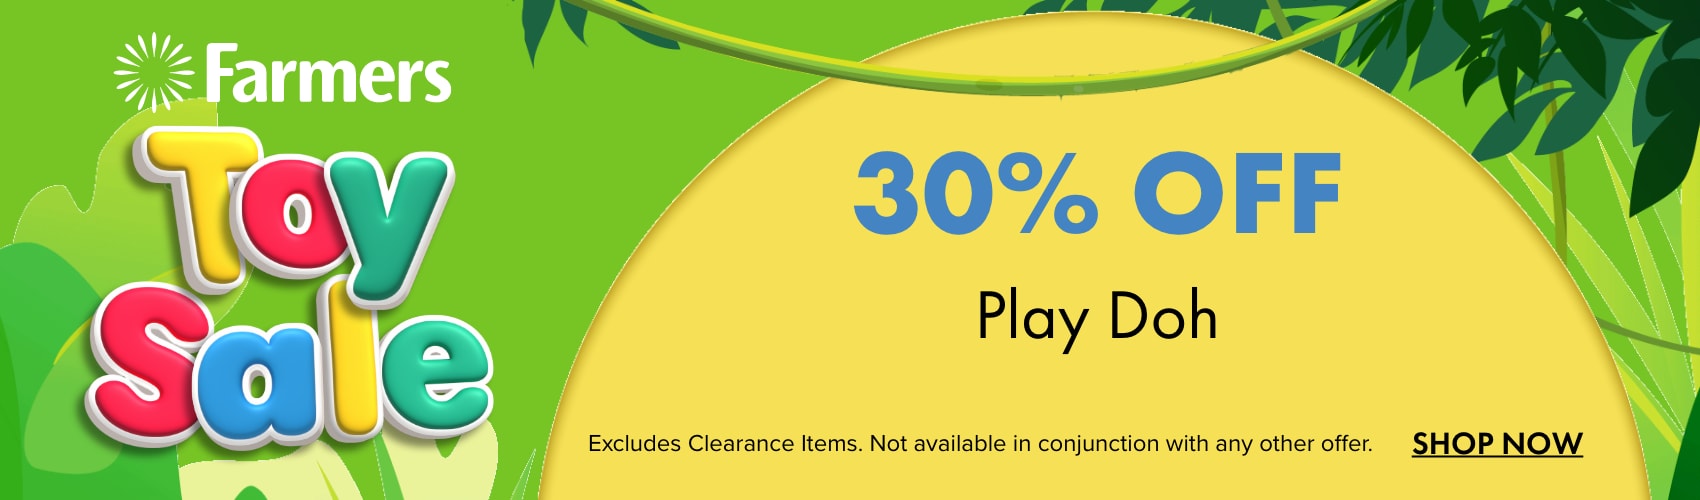 30% OFF Play Doh